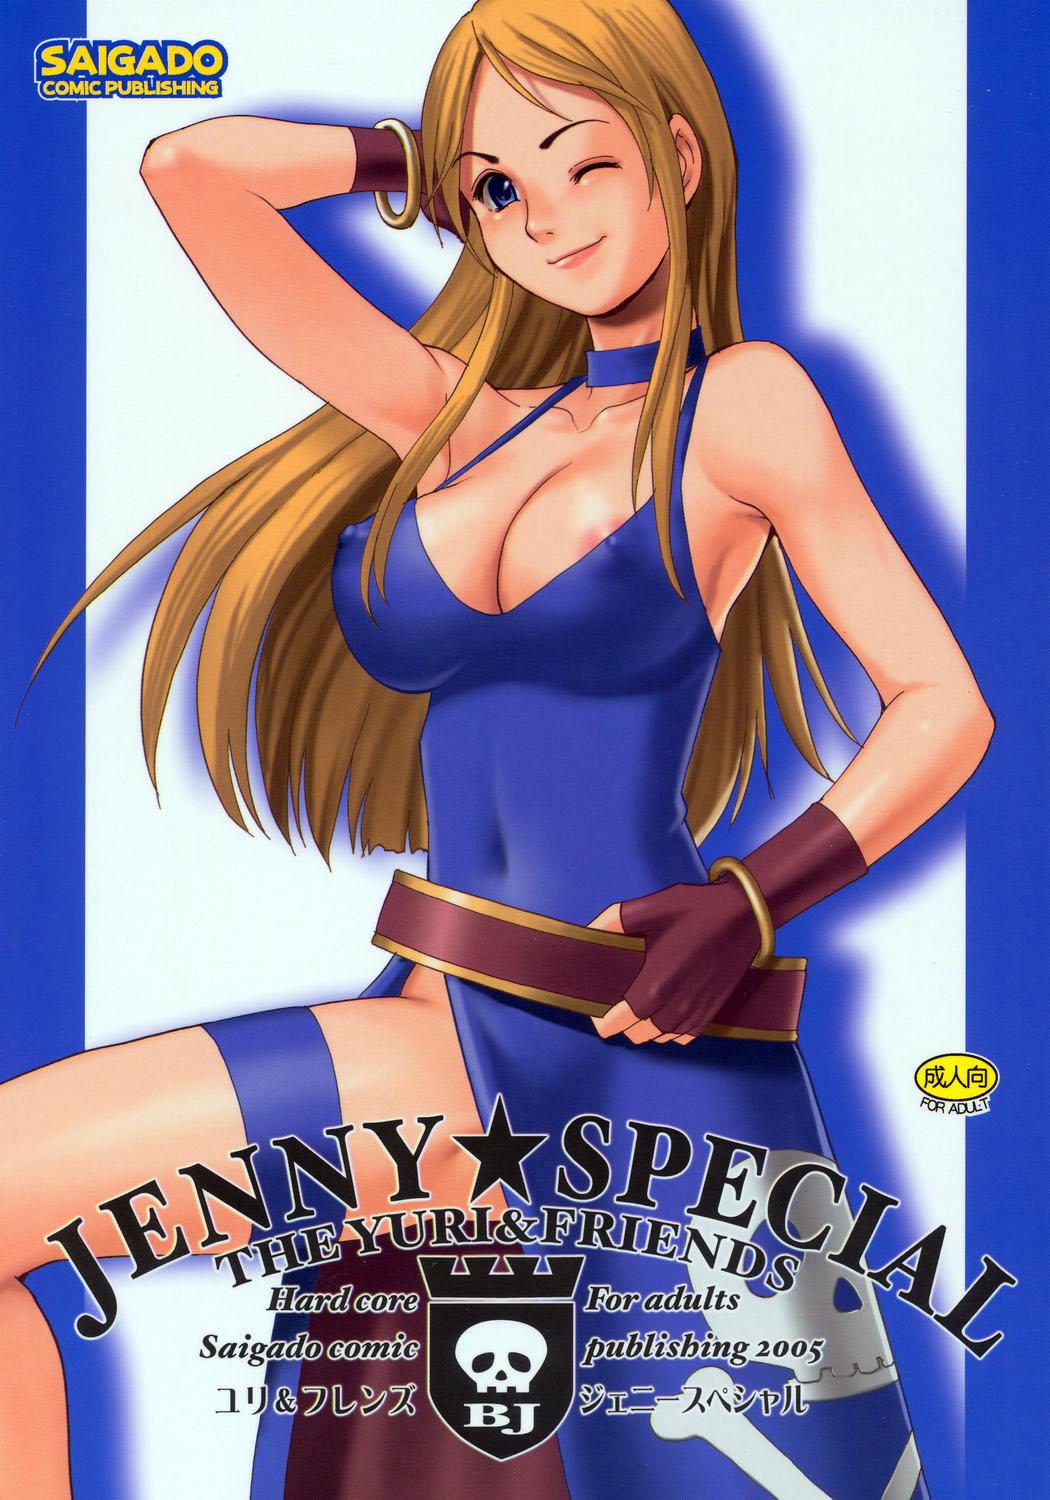 Stroking Yuri & Friends Jenny Special - King of fighters Female - Picture 1